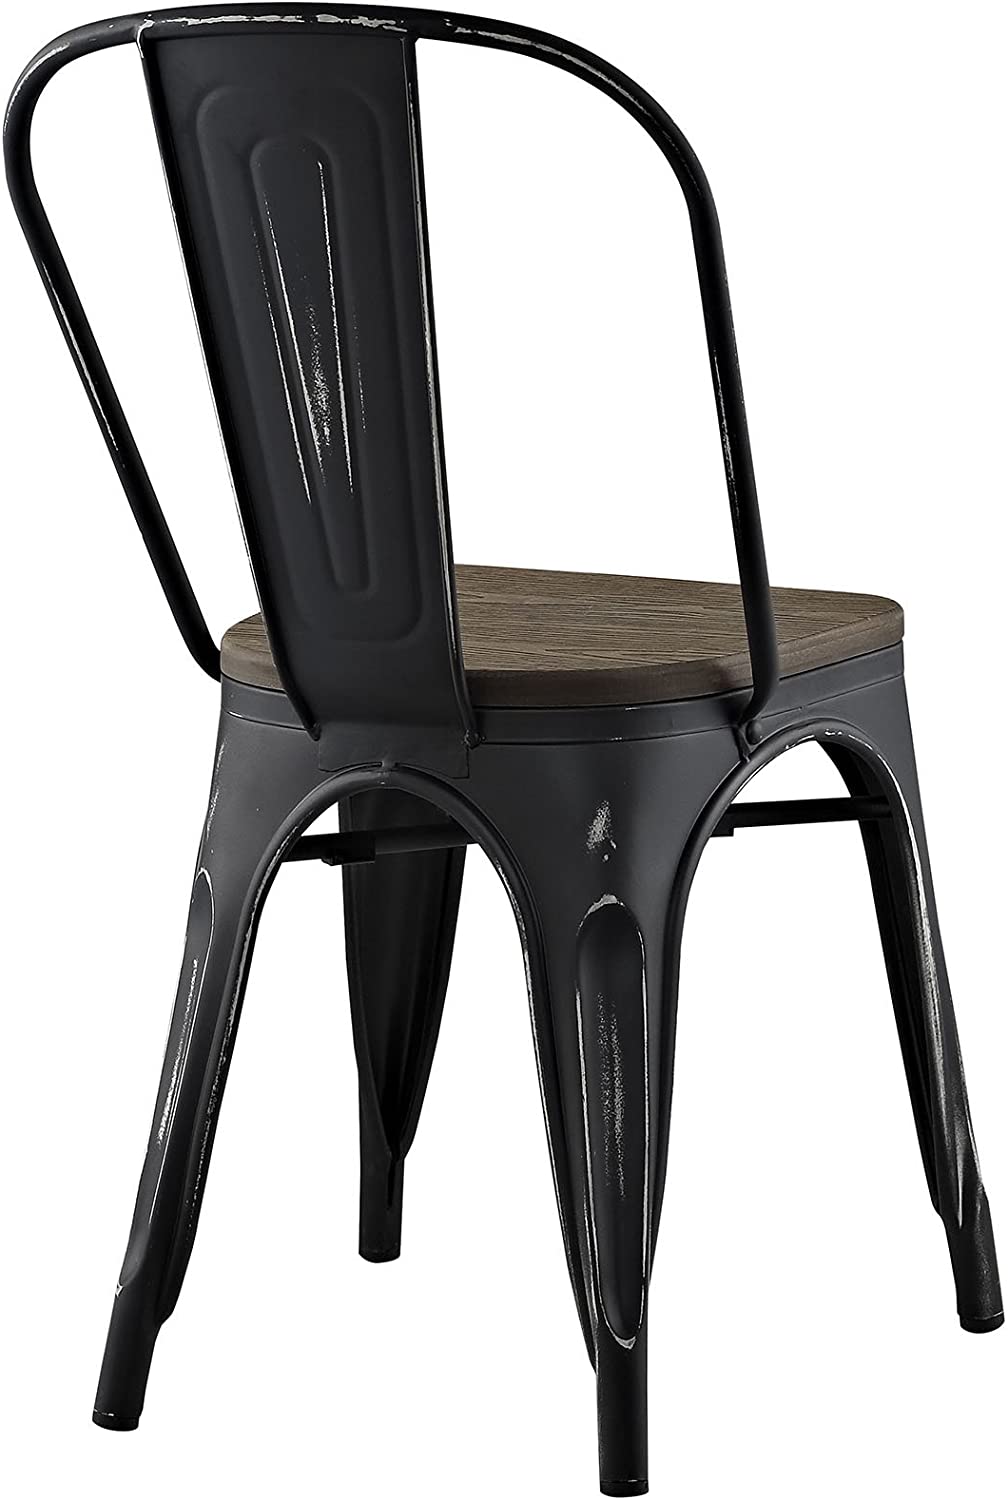 Modway Promenade Industrial Modern Steel Dining Side Chair with Bamboo Seat in Black, One